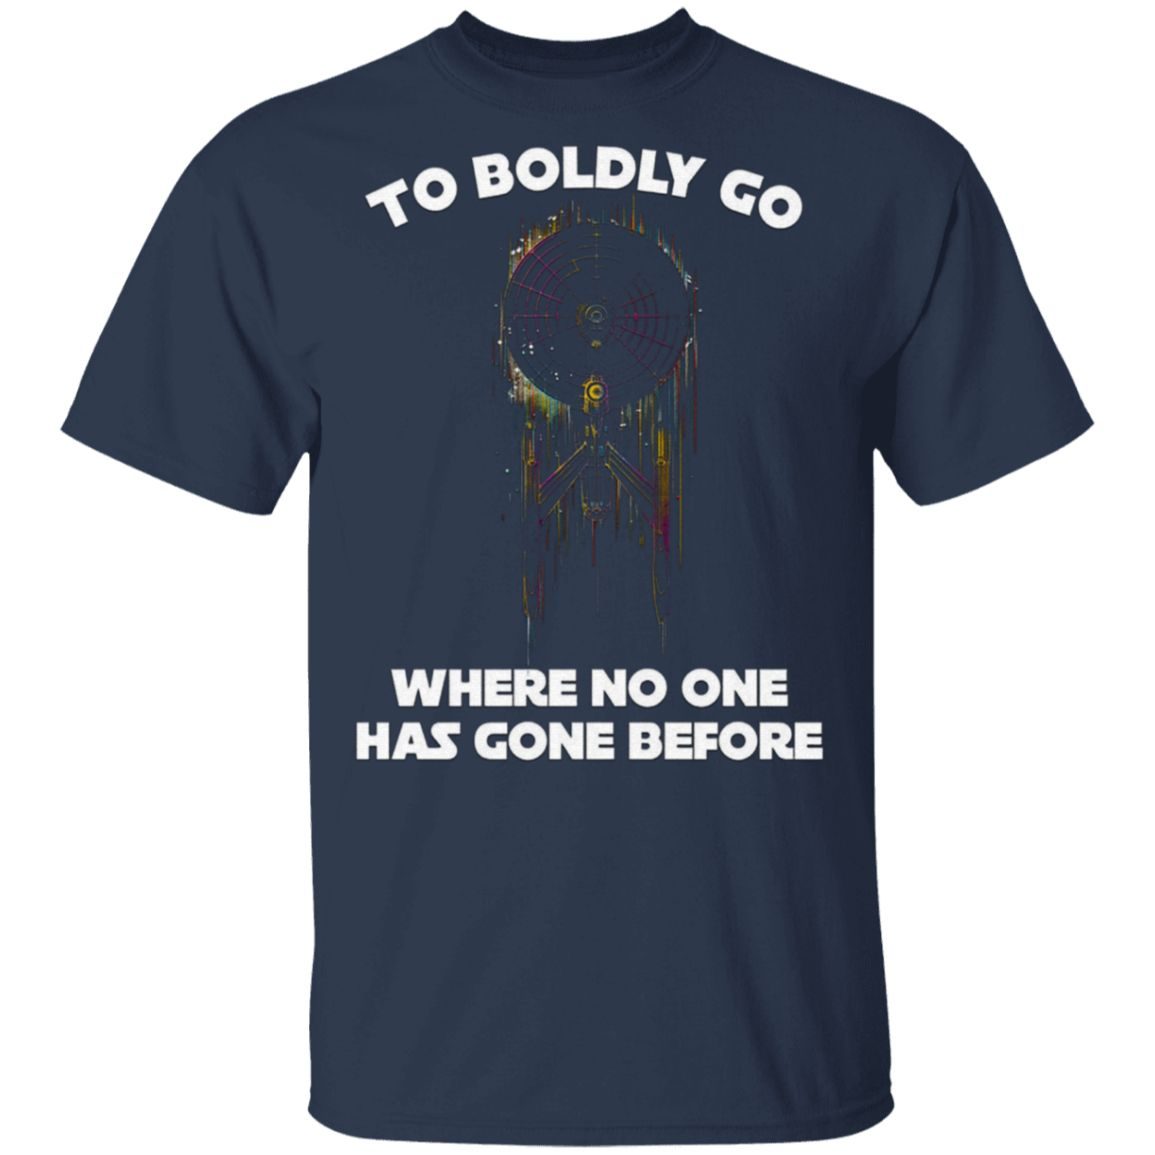 To Boldly Go Where No One Has Gone Before Shirt